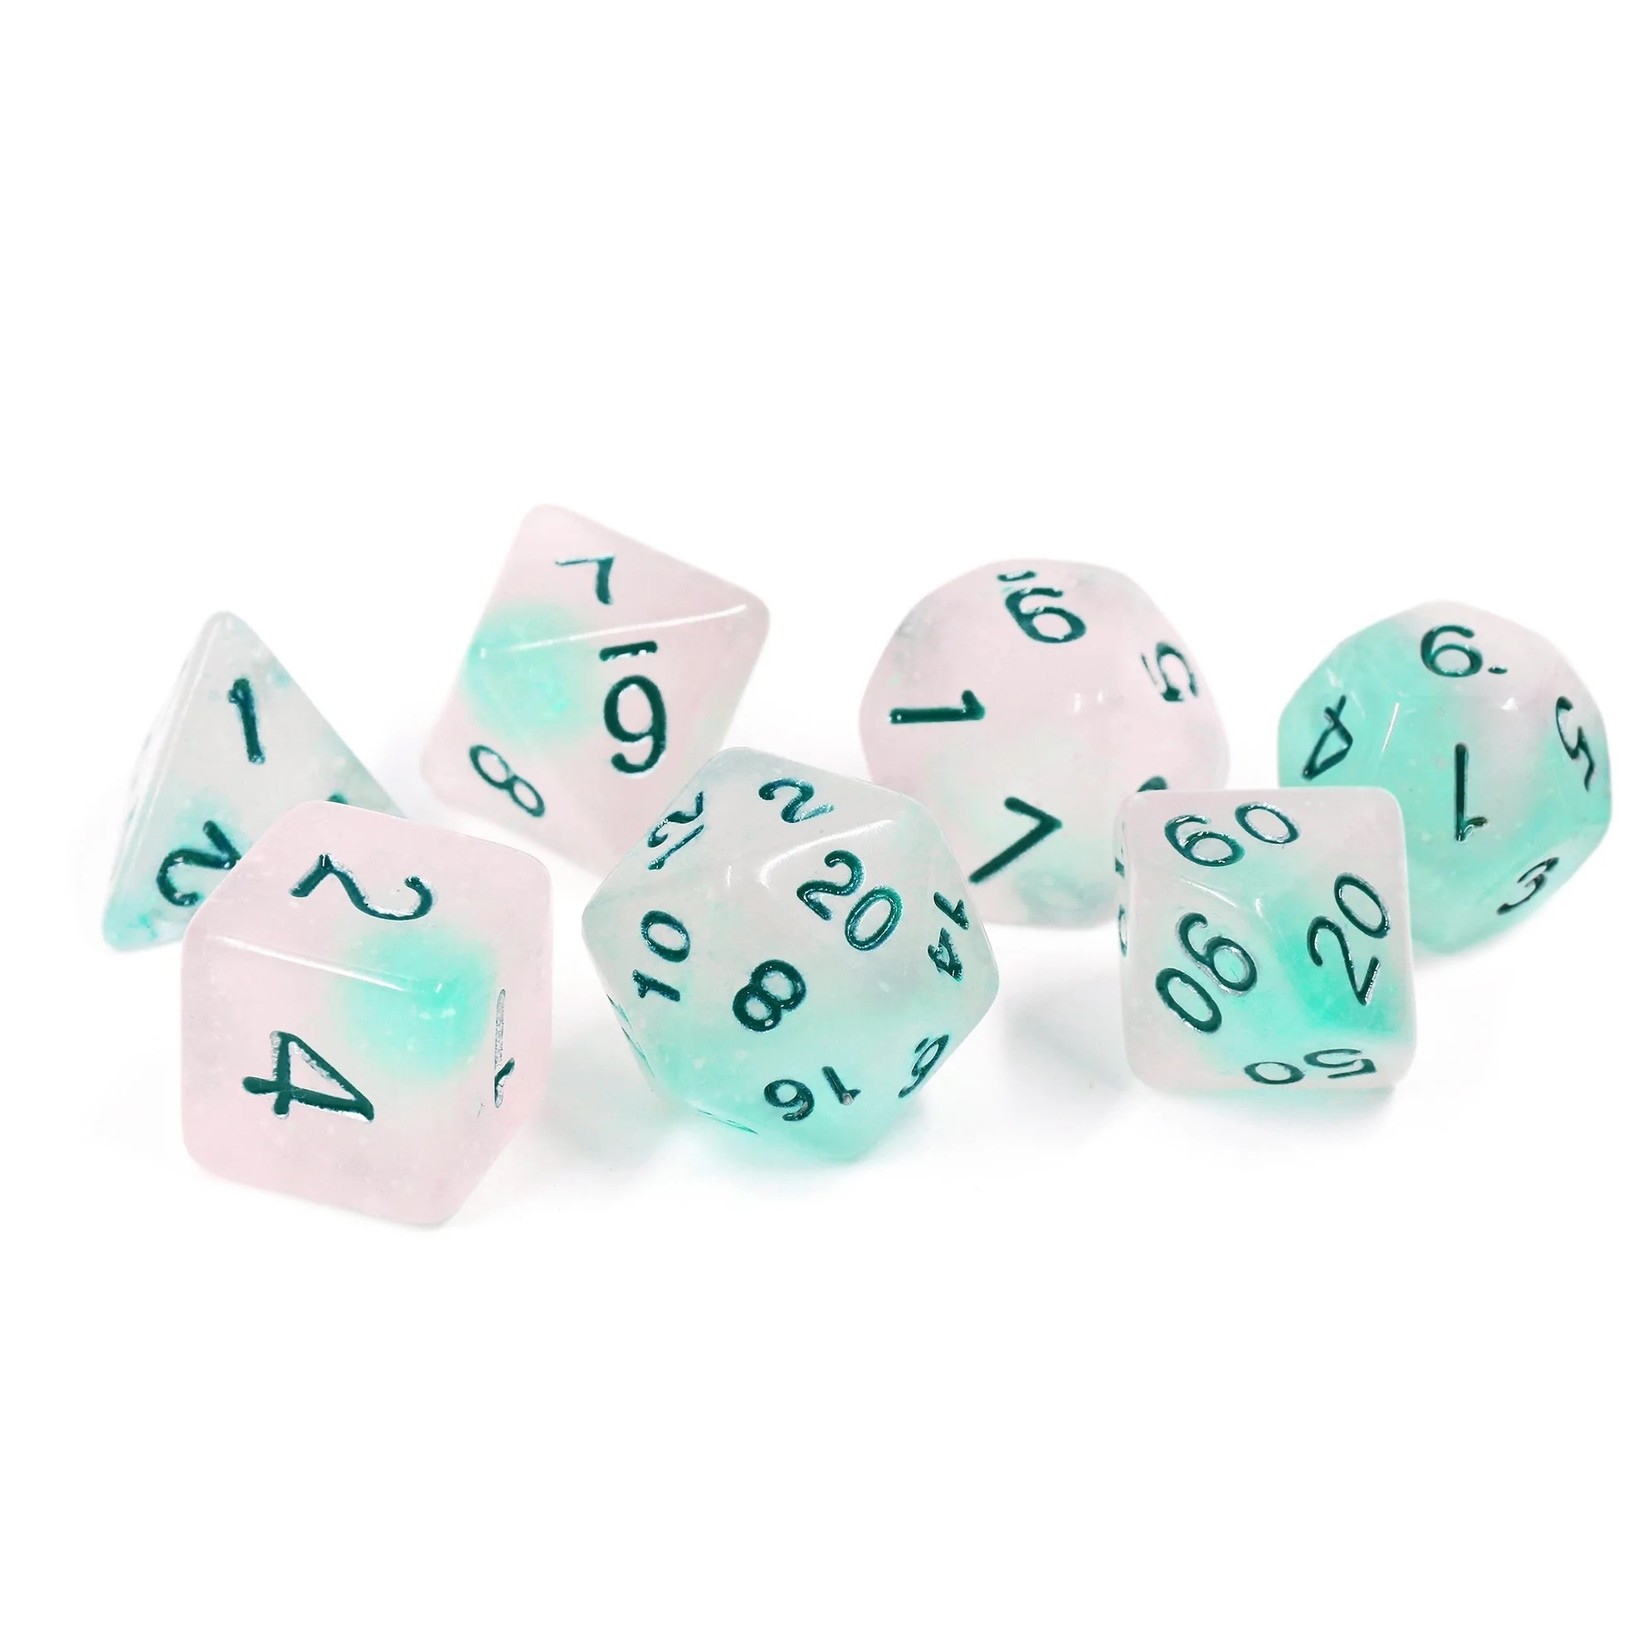 Sirius Dice Frosted Glowworm 7-Set